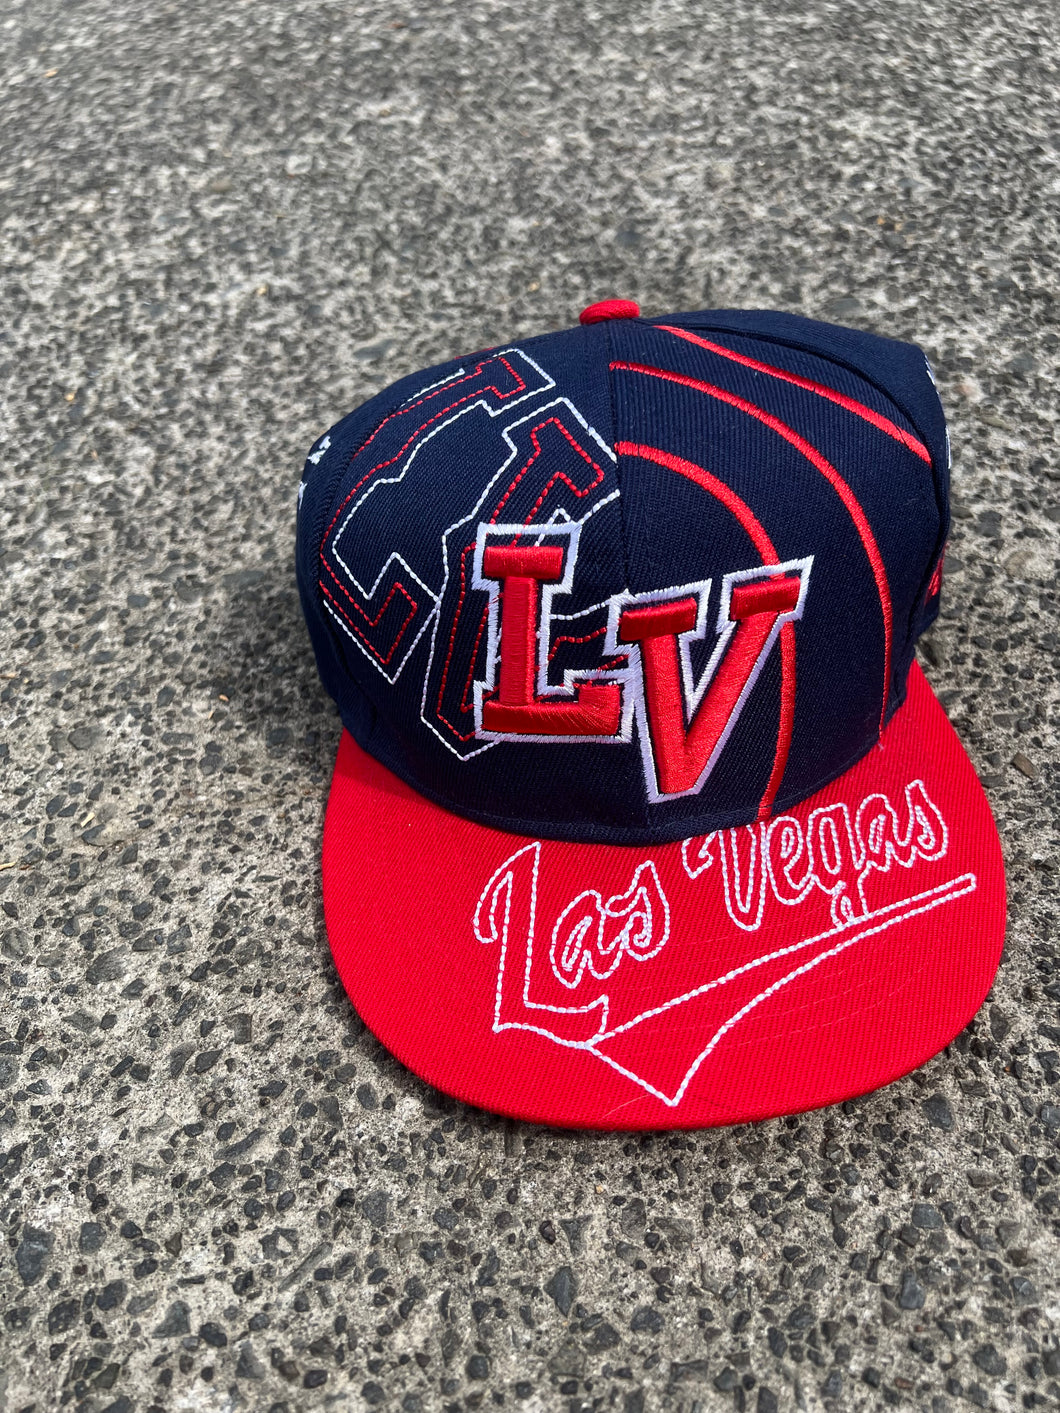 LAS VEGAS HEAVY EMBROIDERED HAT - ONE SIZE FITS ALL OSFA * BRAND NEW *